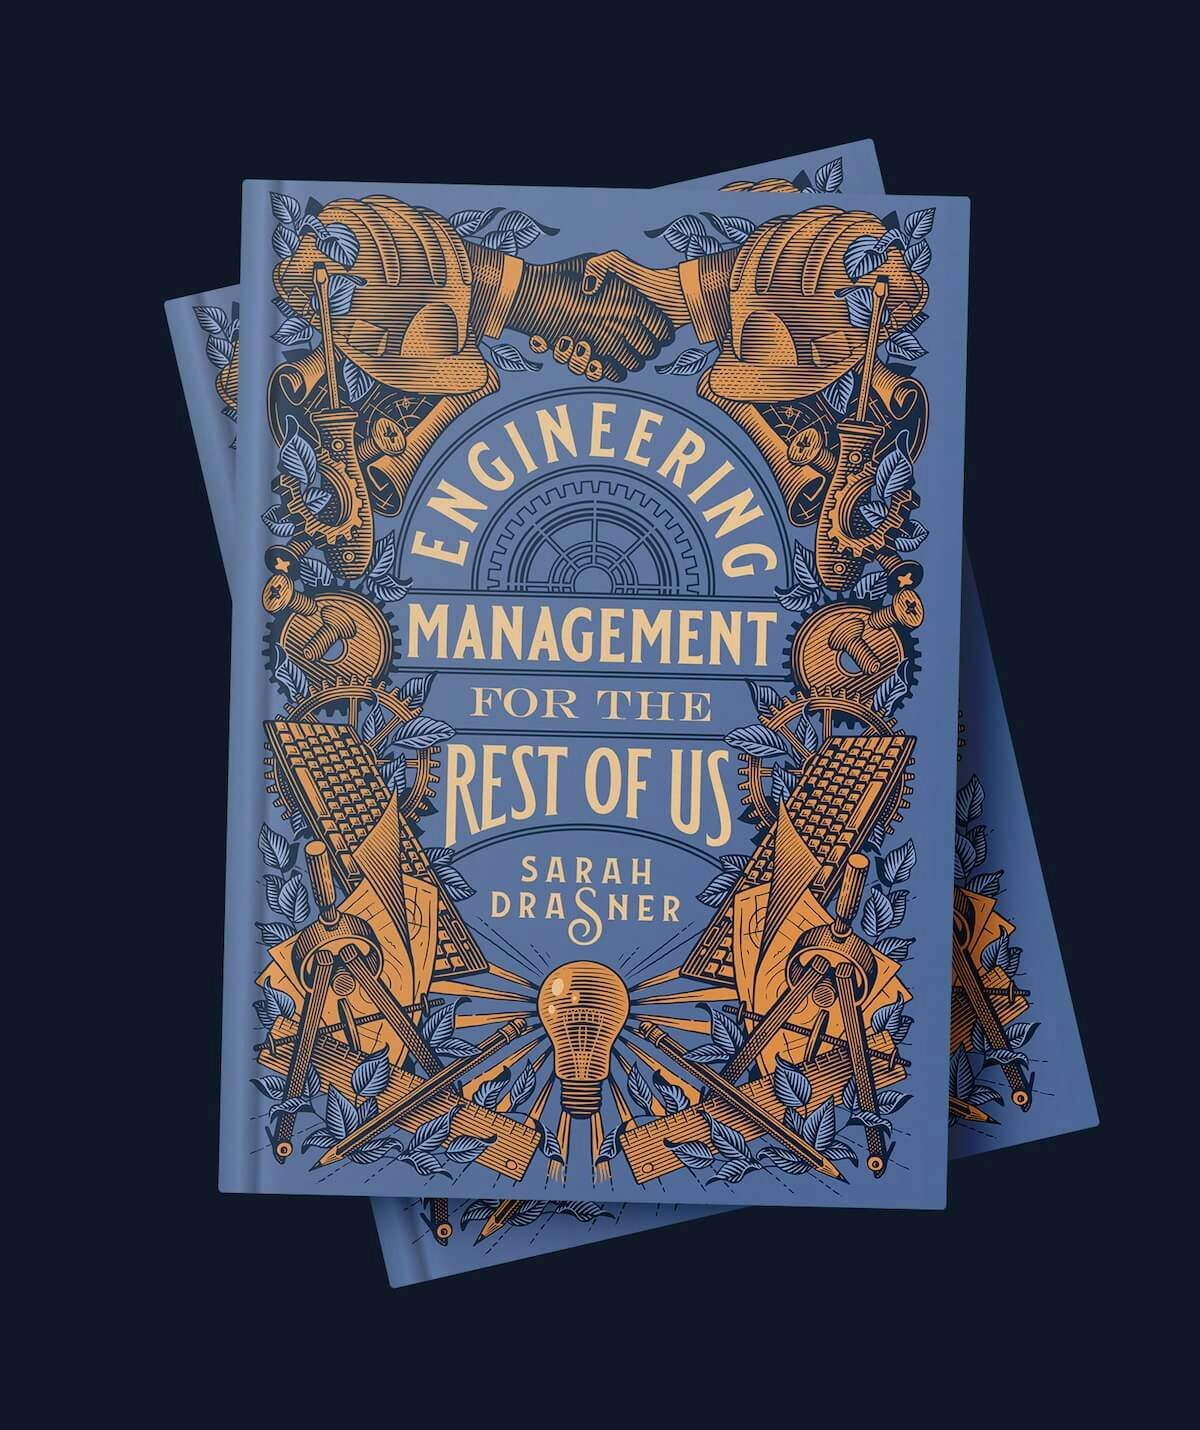 Book mockup of Engineering Management for the Rest of Us